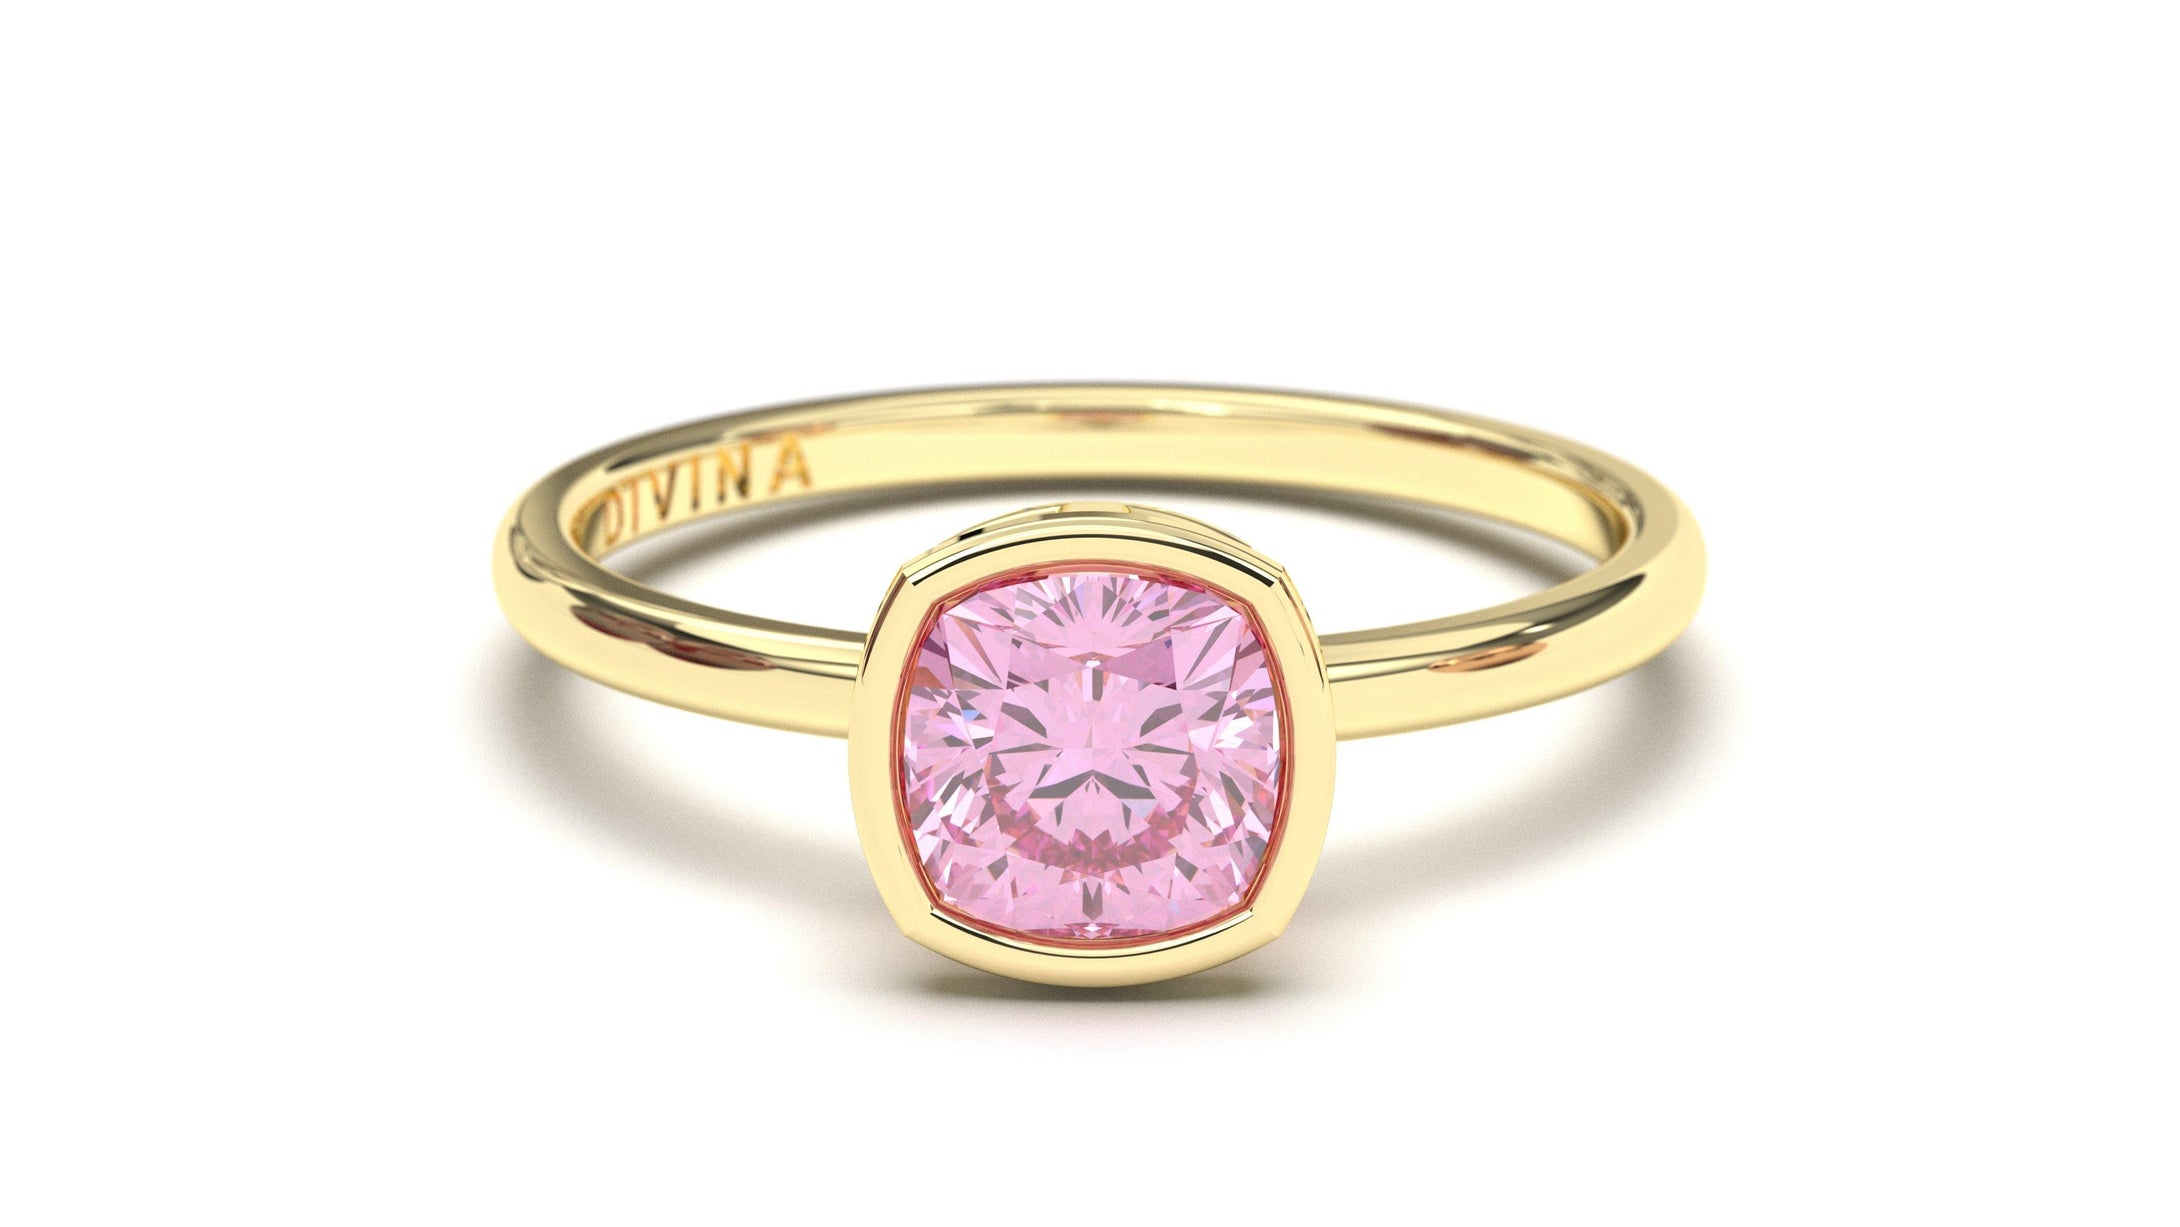 Vintage Style Ring with Cushion Cut Pink Sapphire in Bezel Setting | Heritage Retro VII